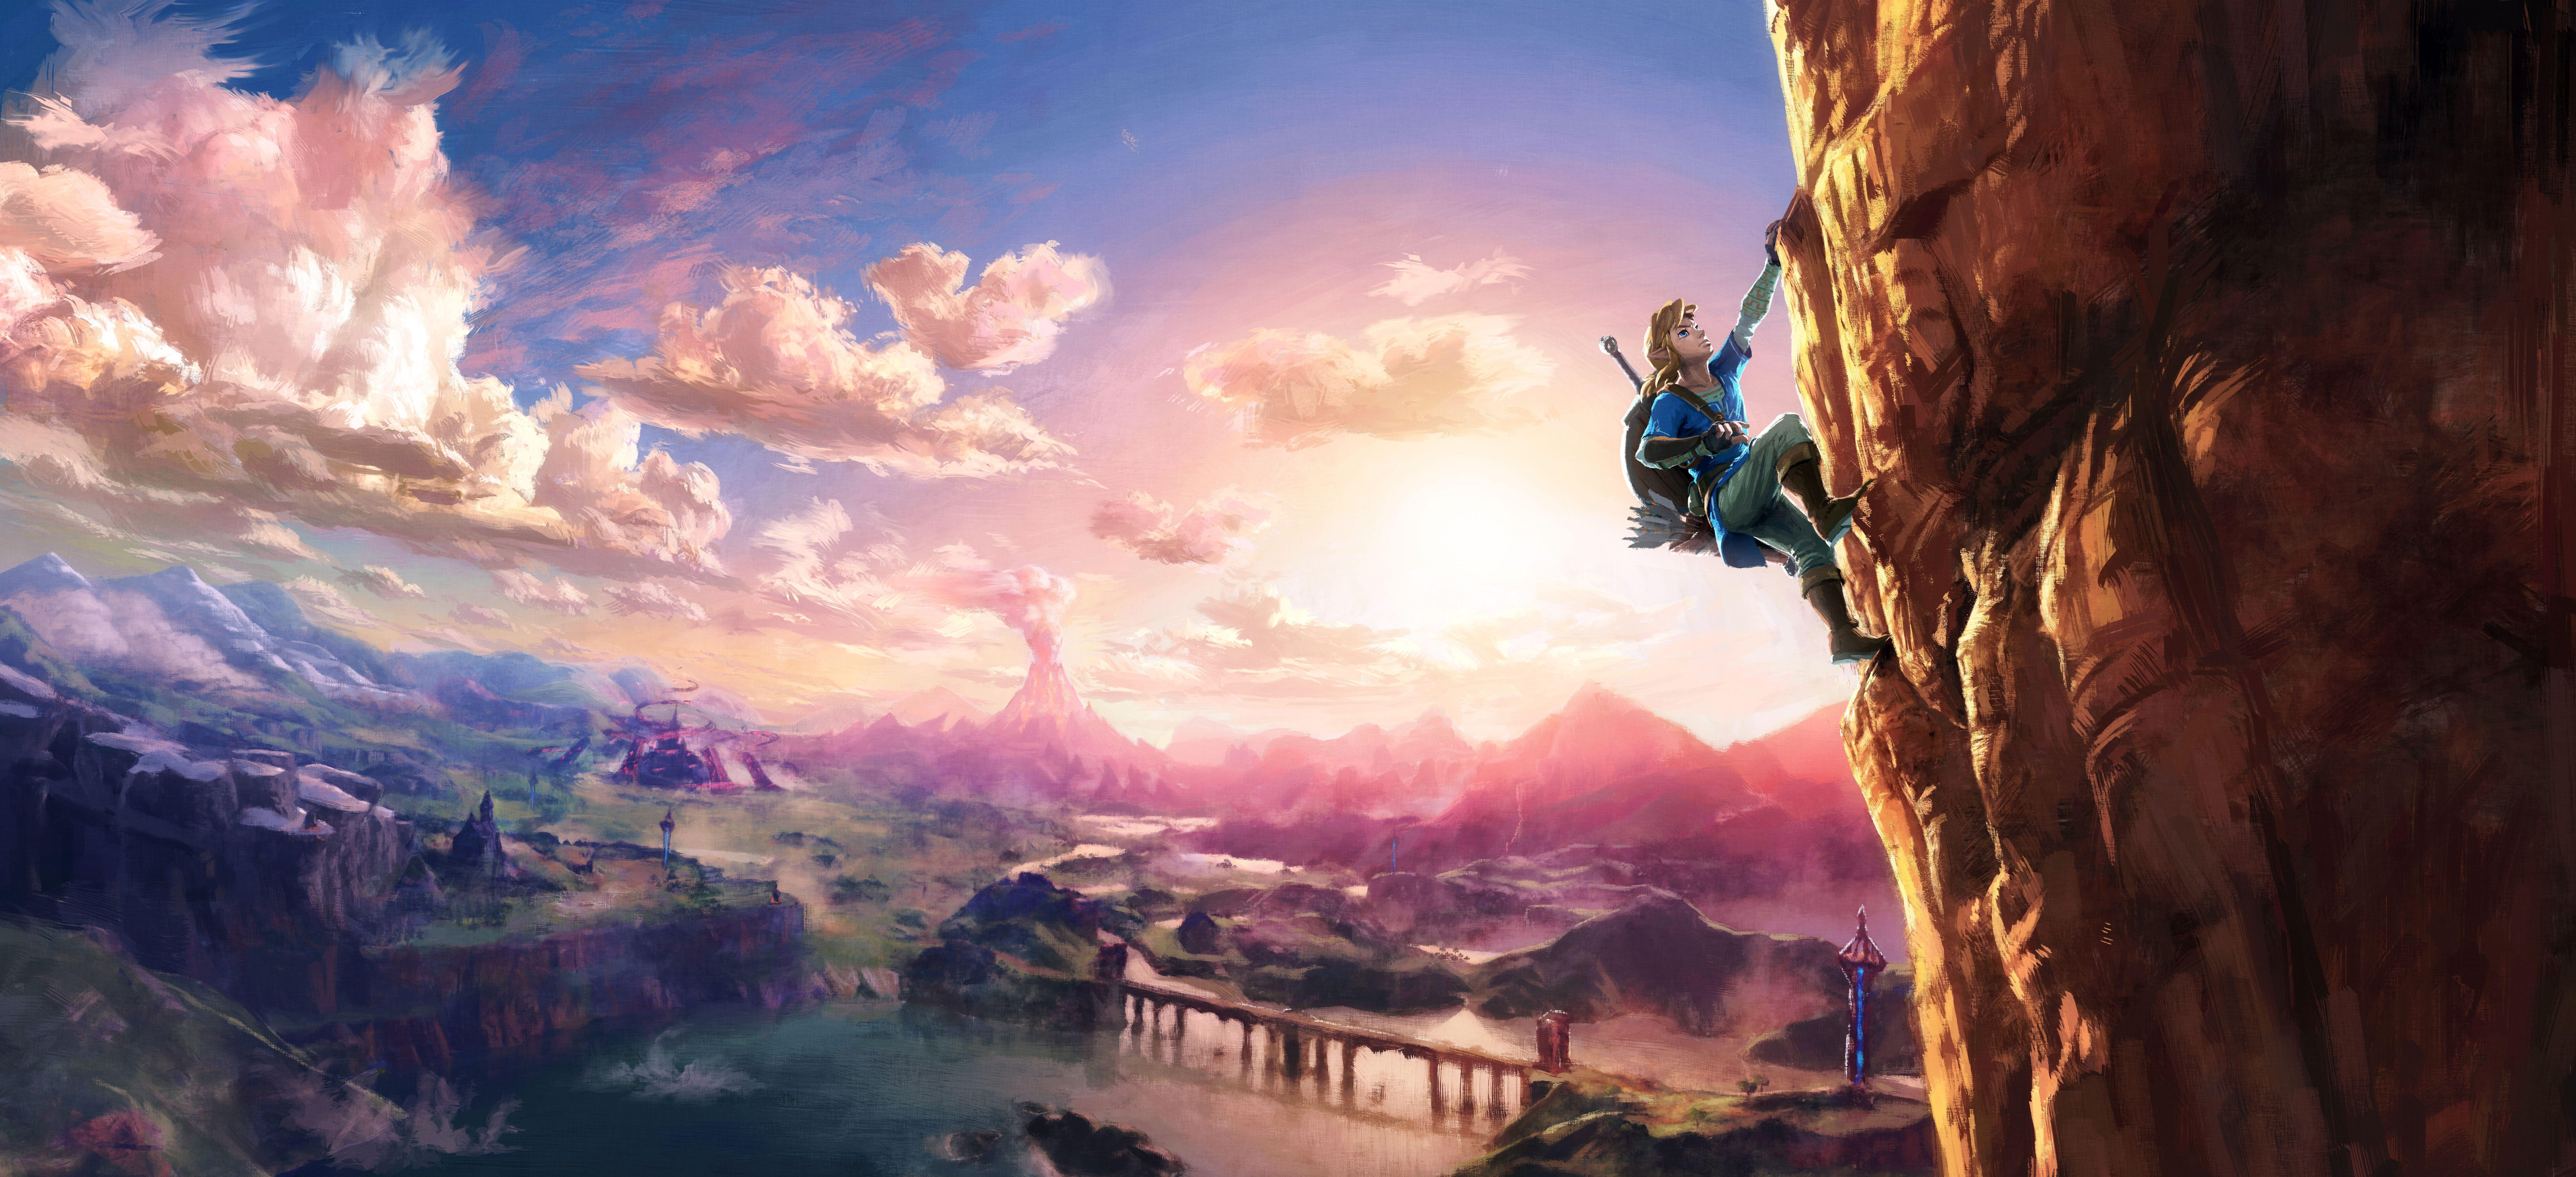 Breath Of The Wild Hd Wallpapers Top Free Breath Of The Wild Hd Backgrounds Wallpaperaccess